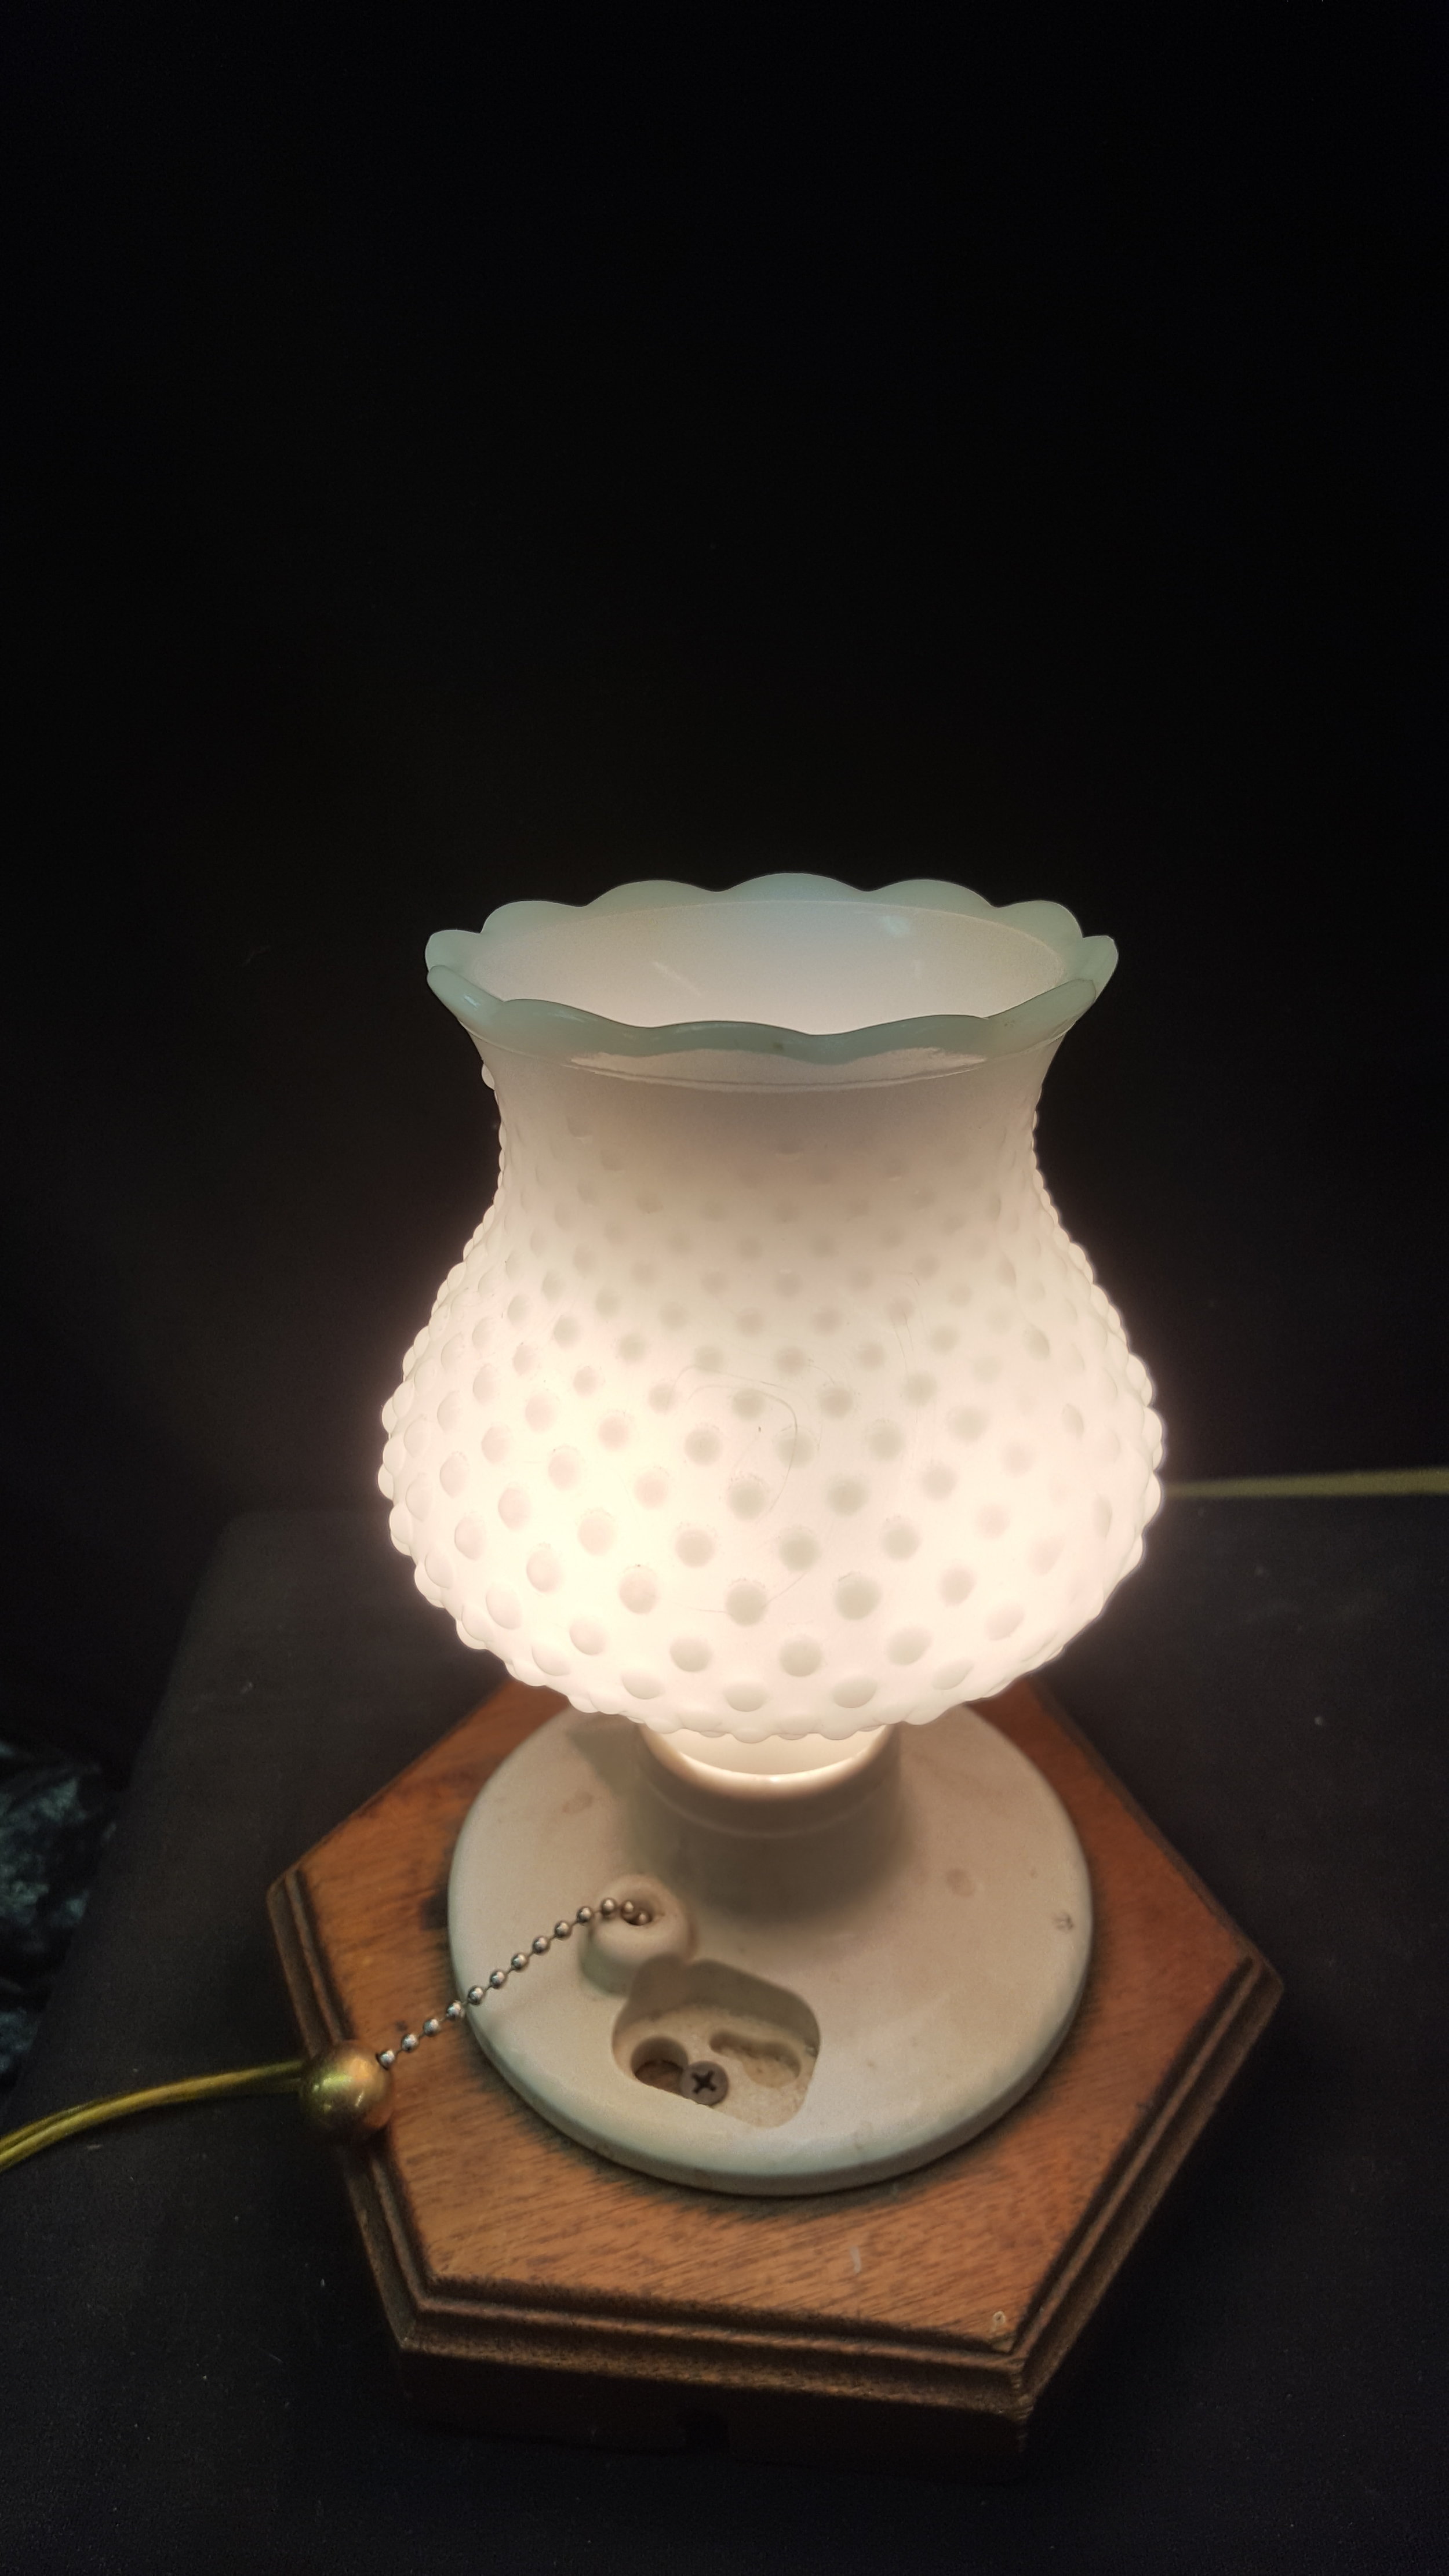 Details about   Vintage Hurricane Lamp Shade White Milk Glass Hobnail Scalloped Sconce Globe 